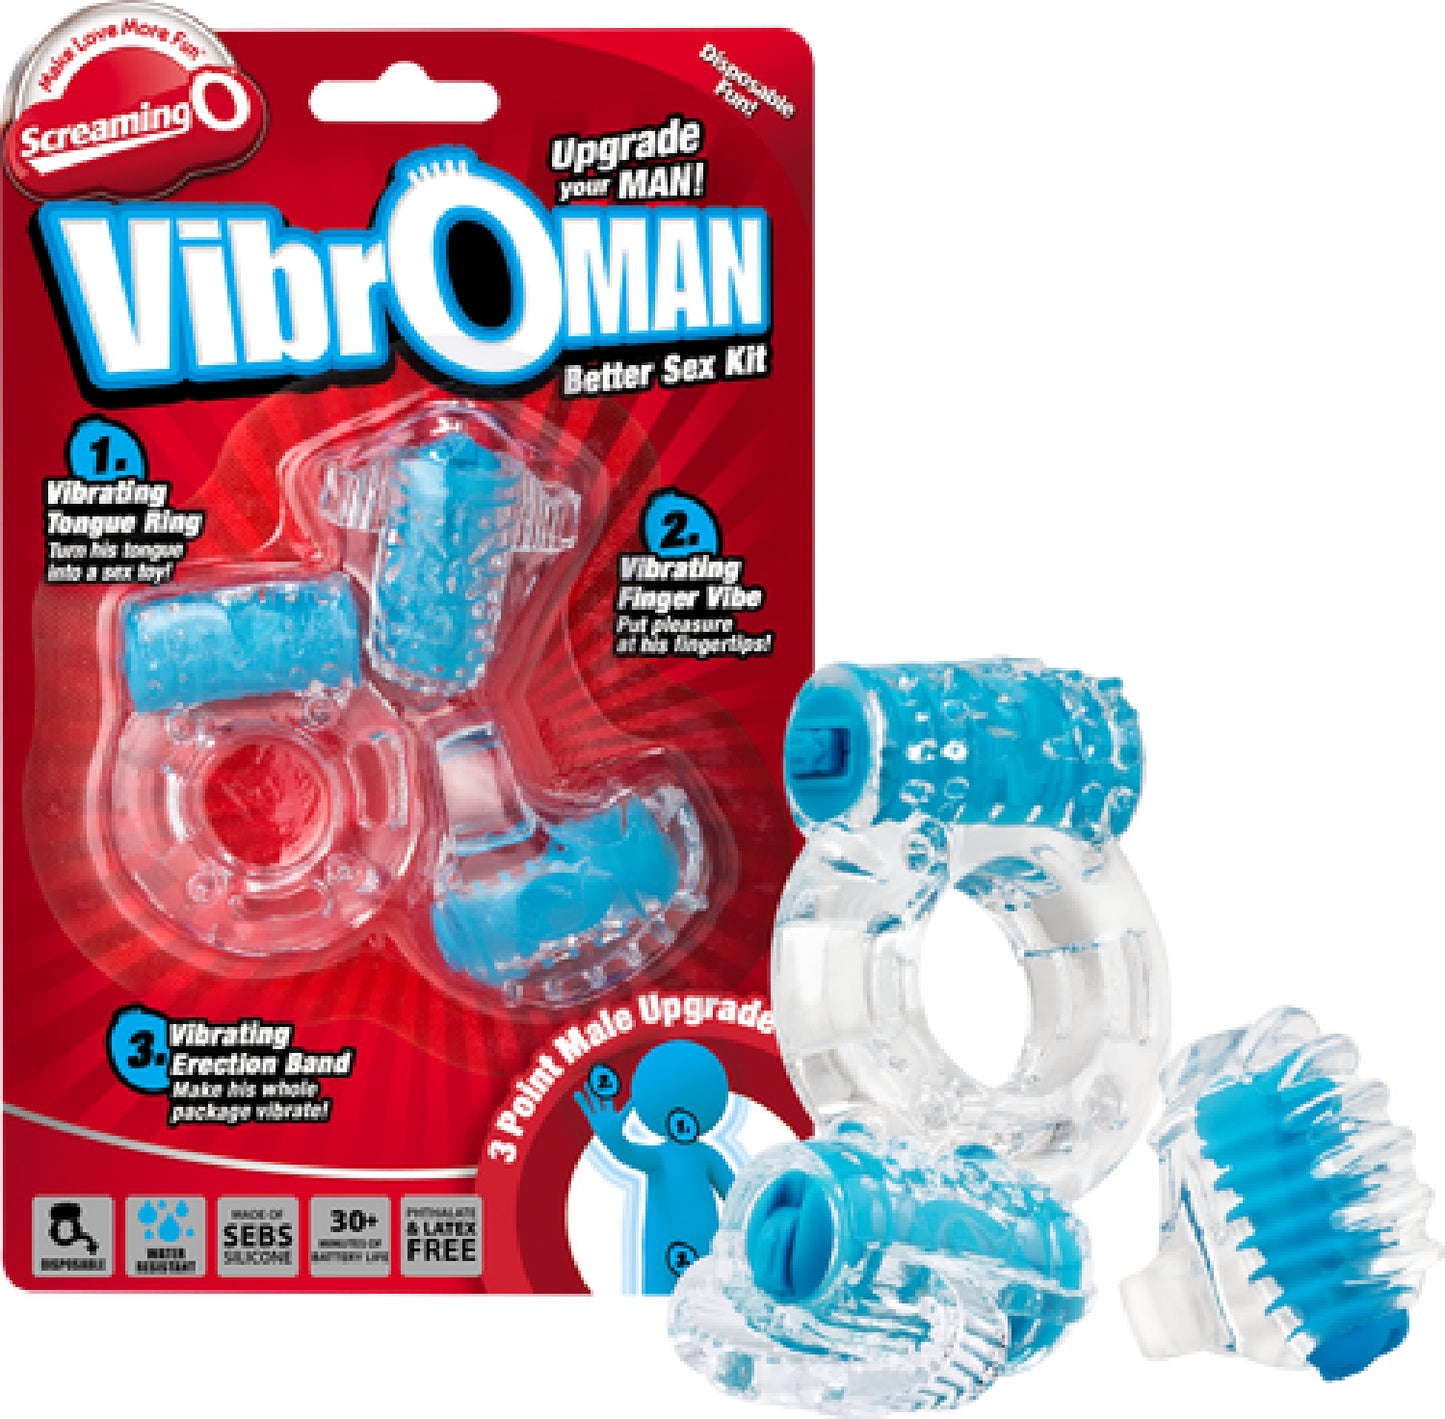 Vibroman Three Piece Couples Sex Kit by Screaming O Pleasure Products,  Includes Vibrating Tongue Ring, Finger Vibrator and Vibrating Erection Band  